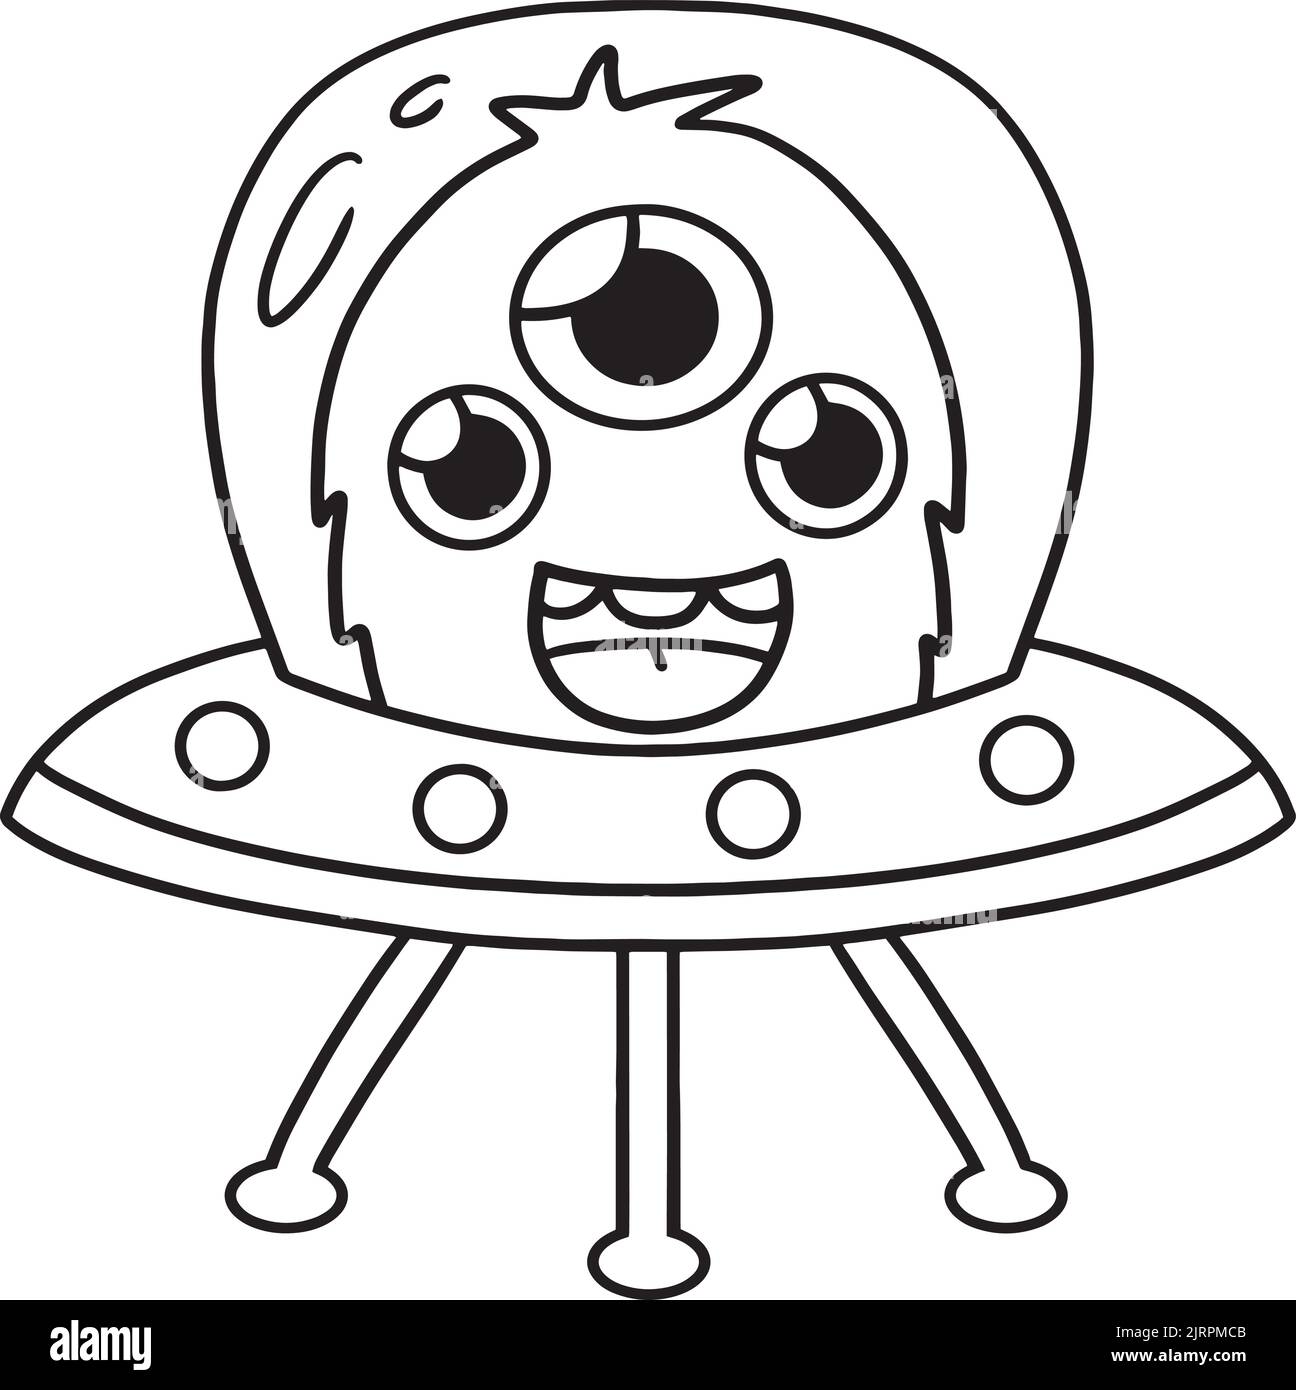 UFO Alien Space Isolated Coloring Page for Kids Stock Vector